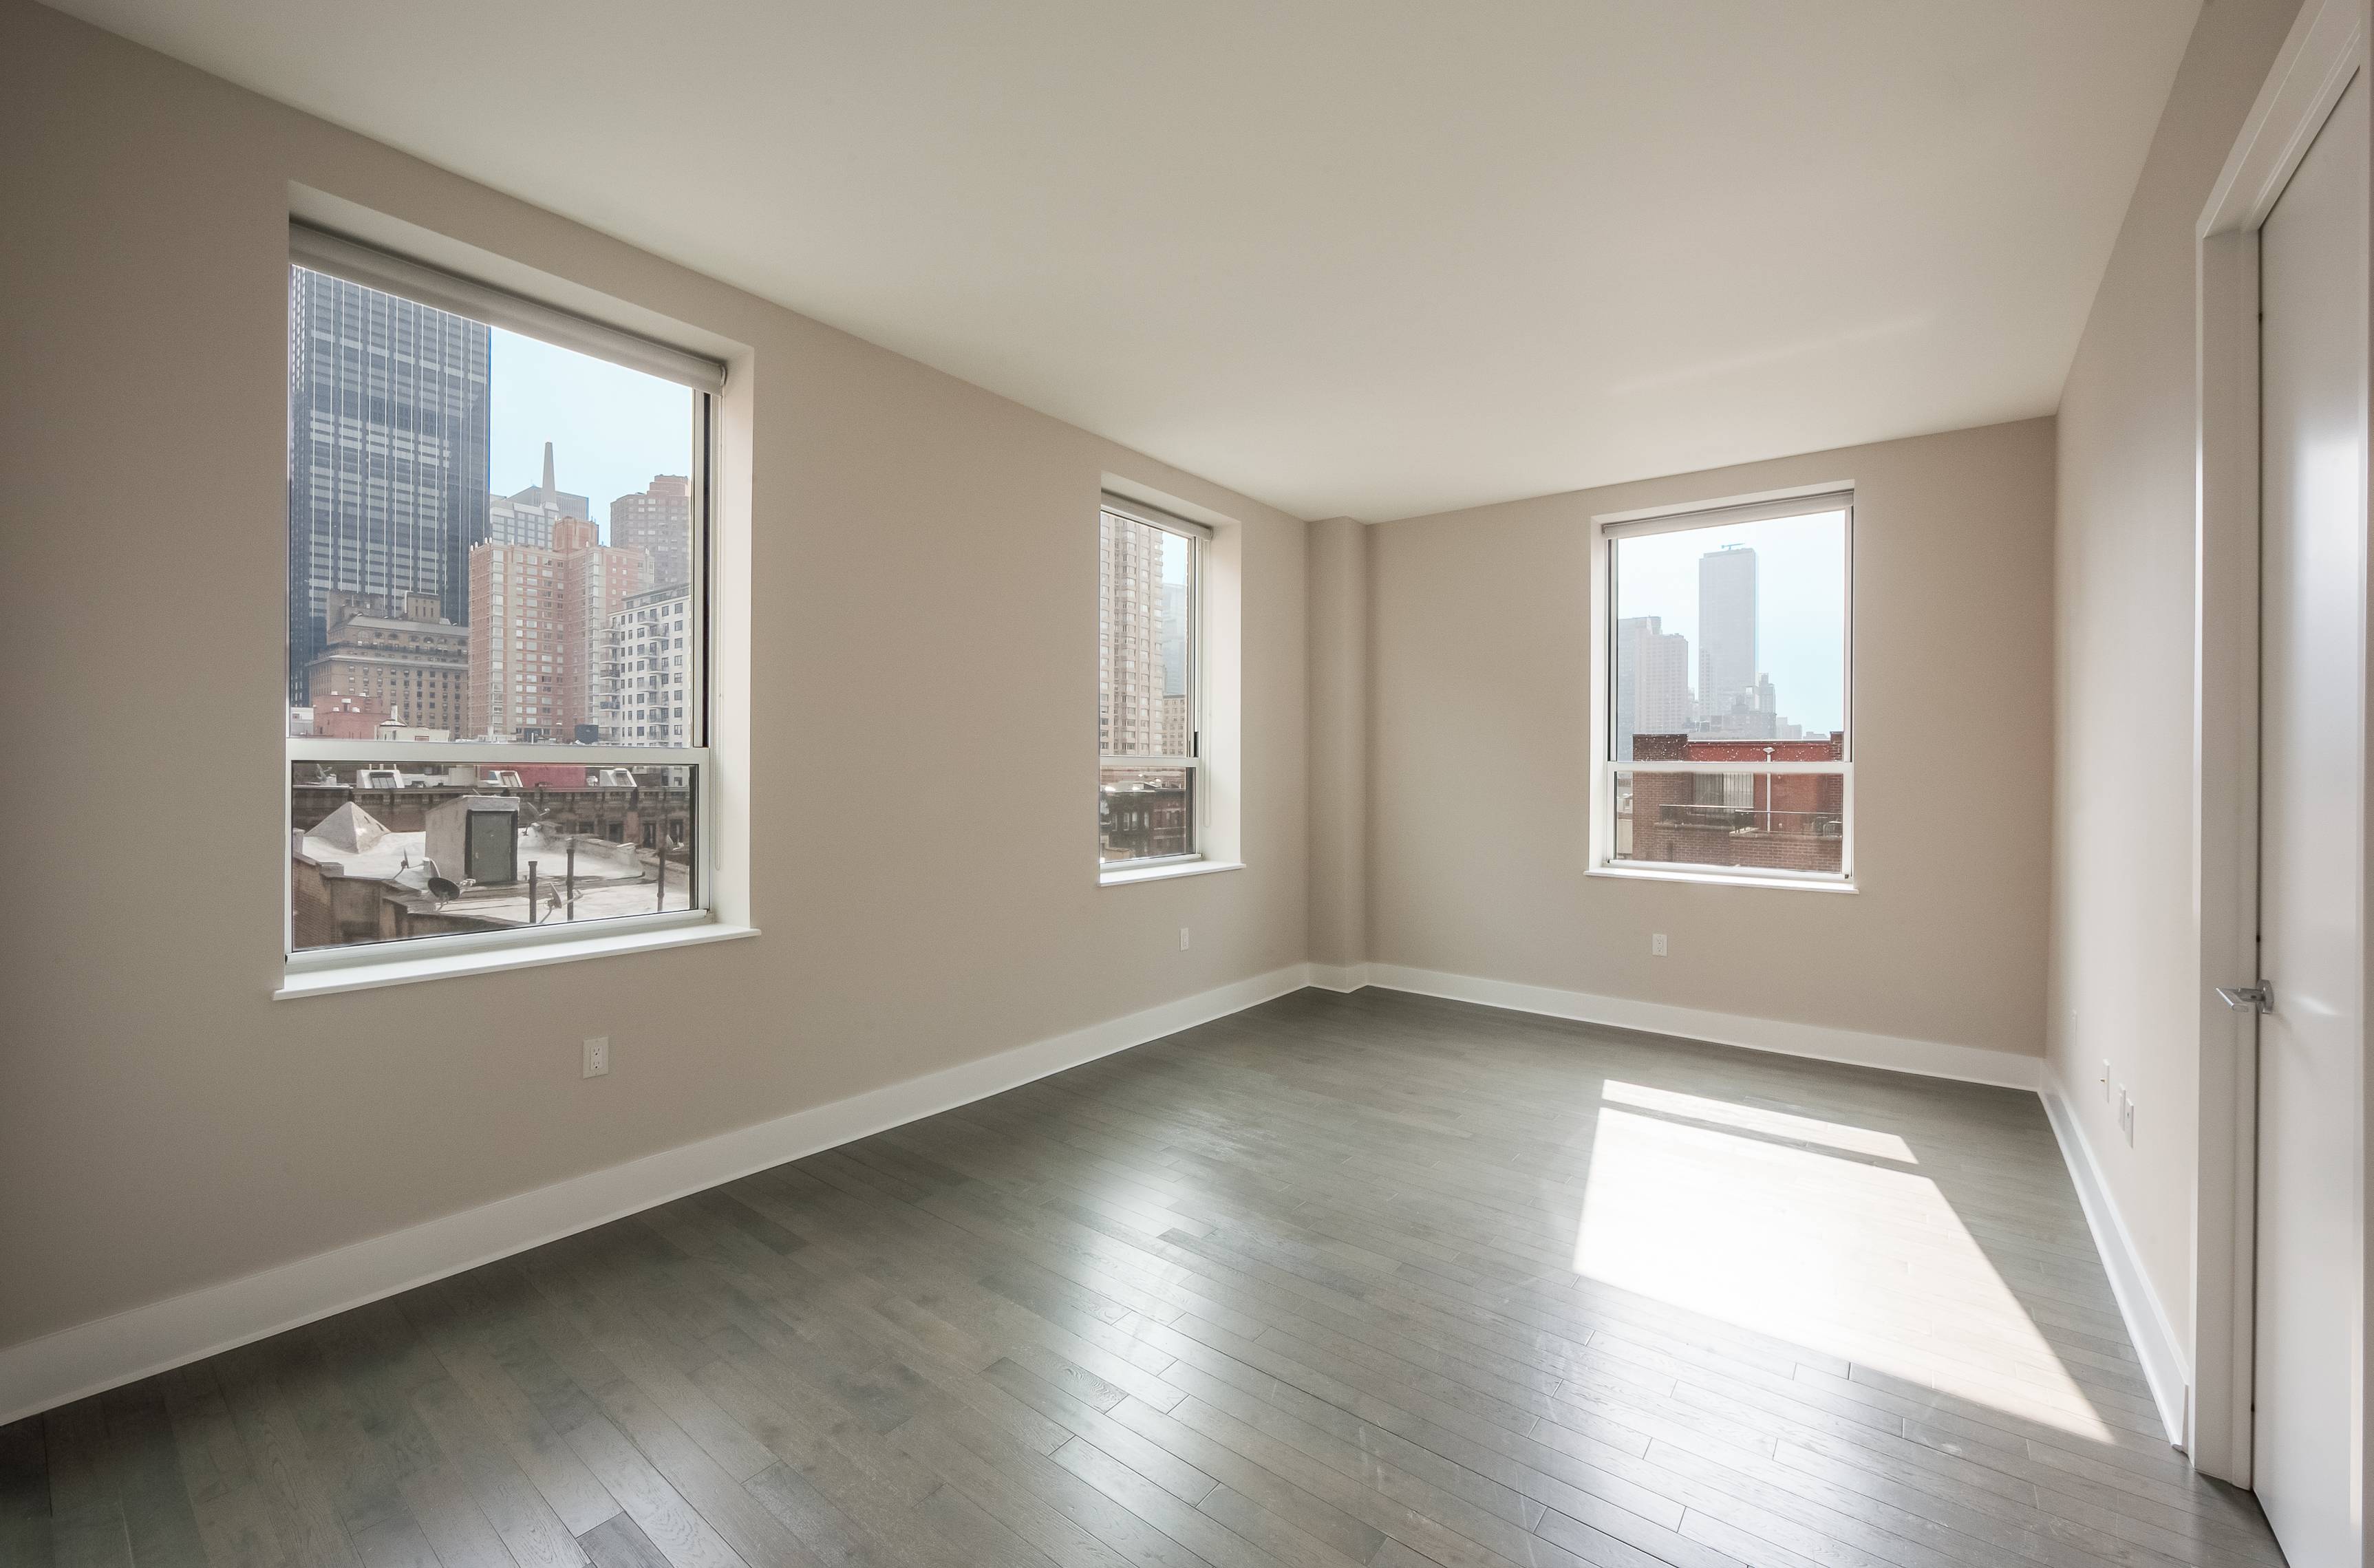 NEW LISTING !! STUNNING, BRAND NEW 2 BED / 2 BATH in HELL'S KITCHEN available for RENT !